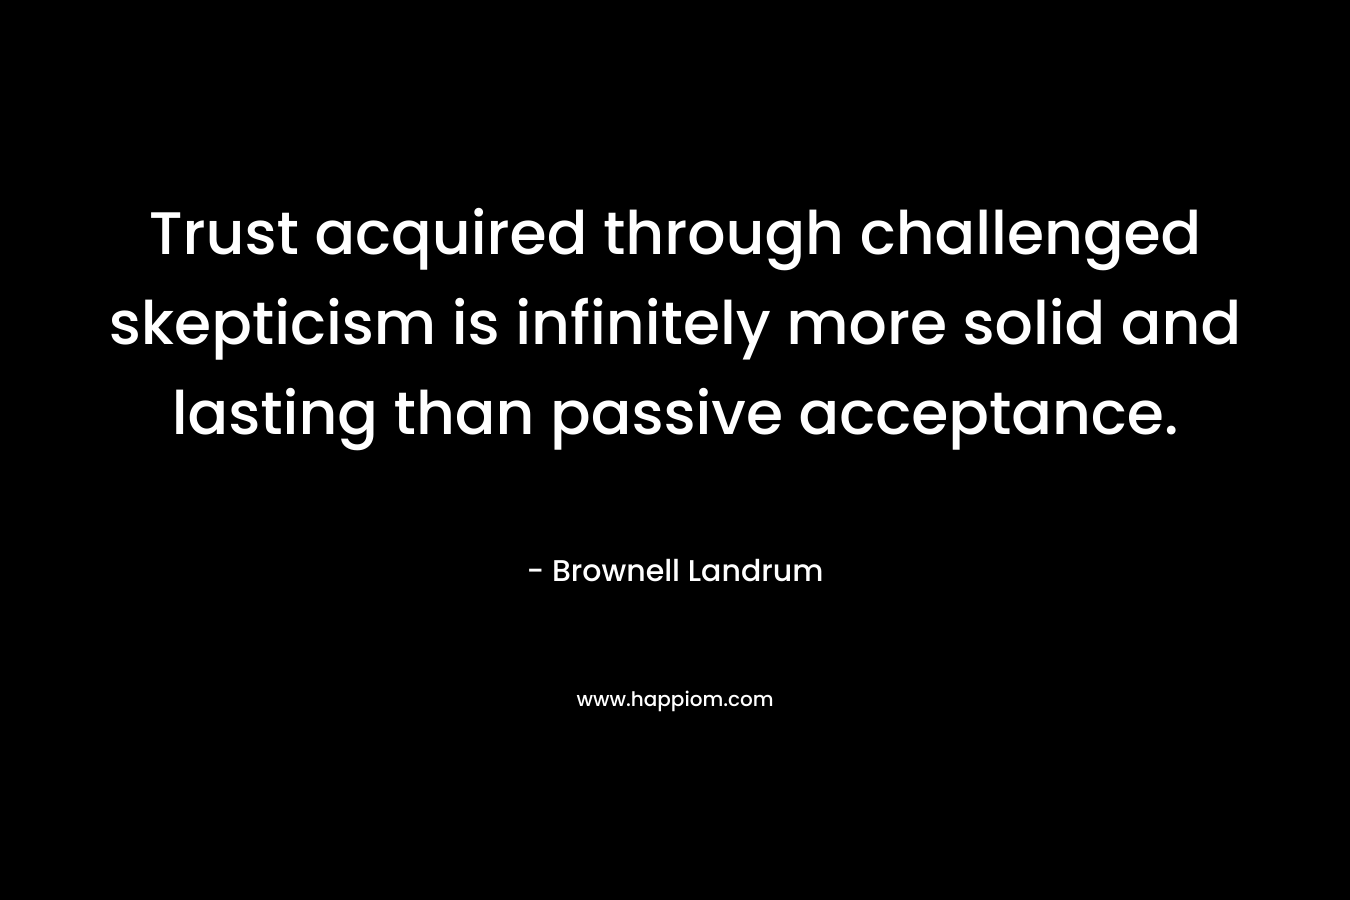 Trust acquired through challenged skepticism is infinitely more solid and lasting than passive acceptance.